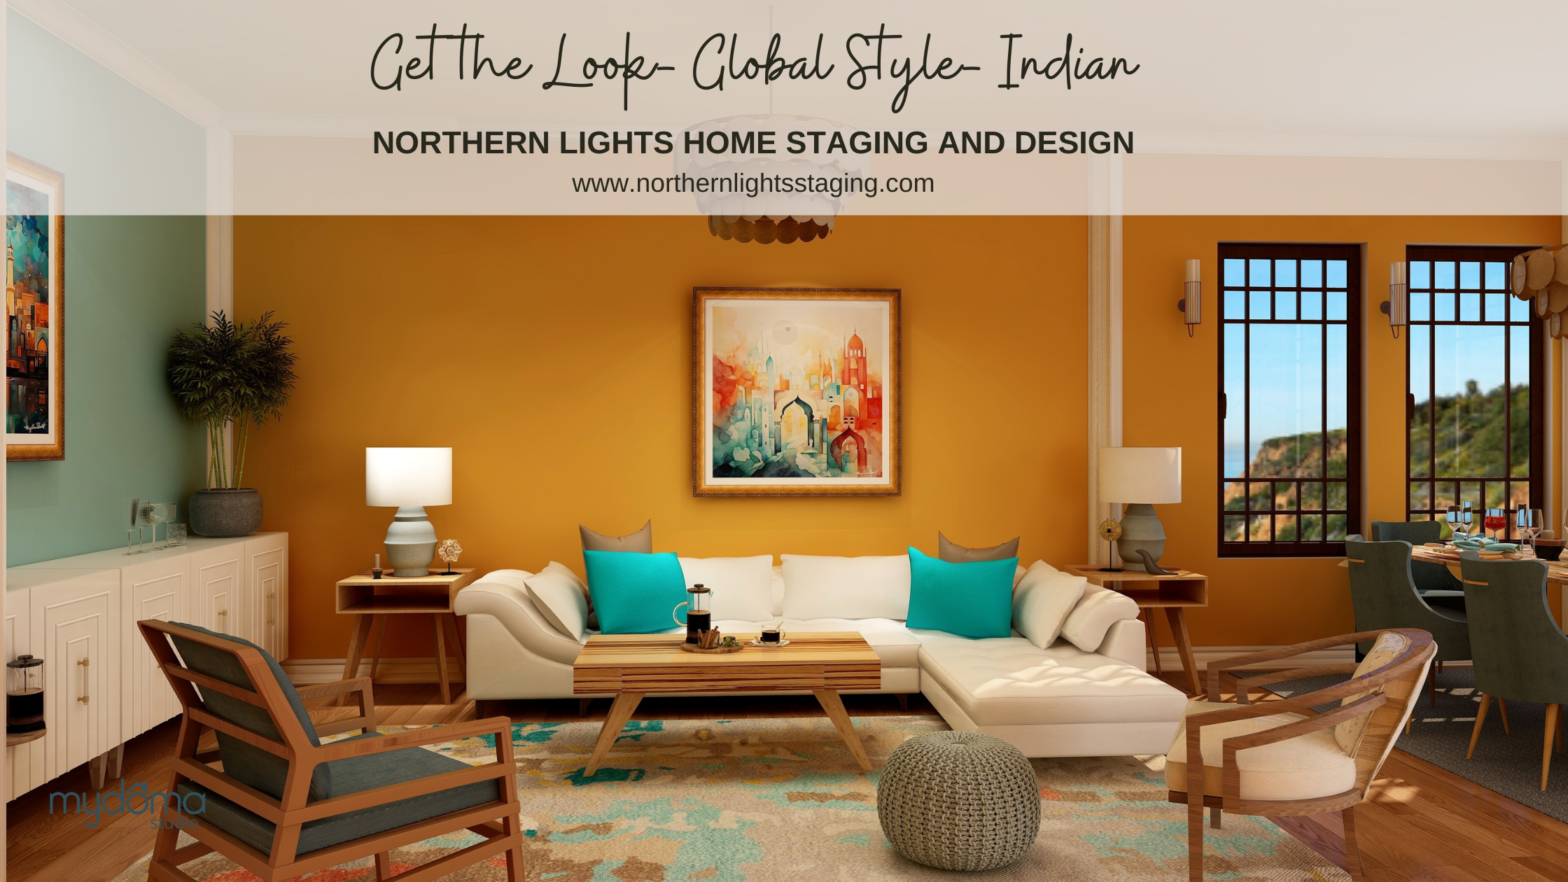 Get the Look-Global Style Indian